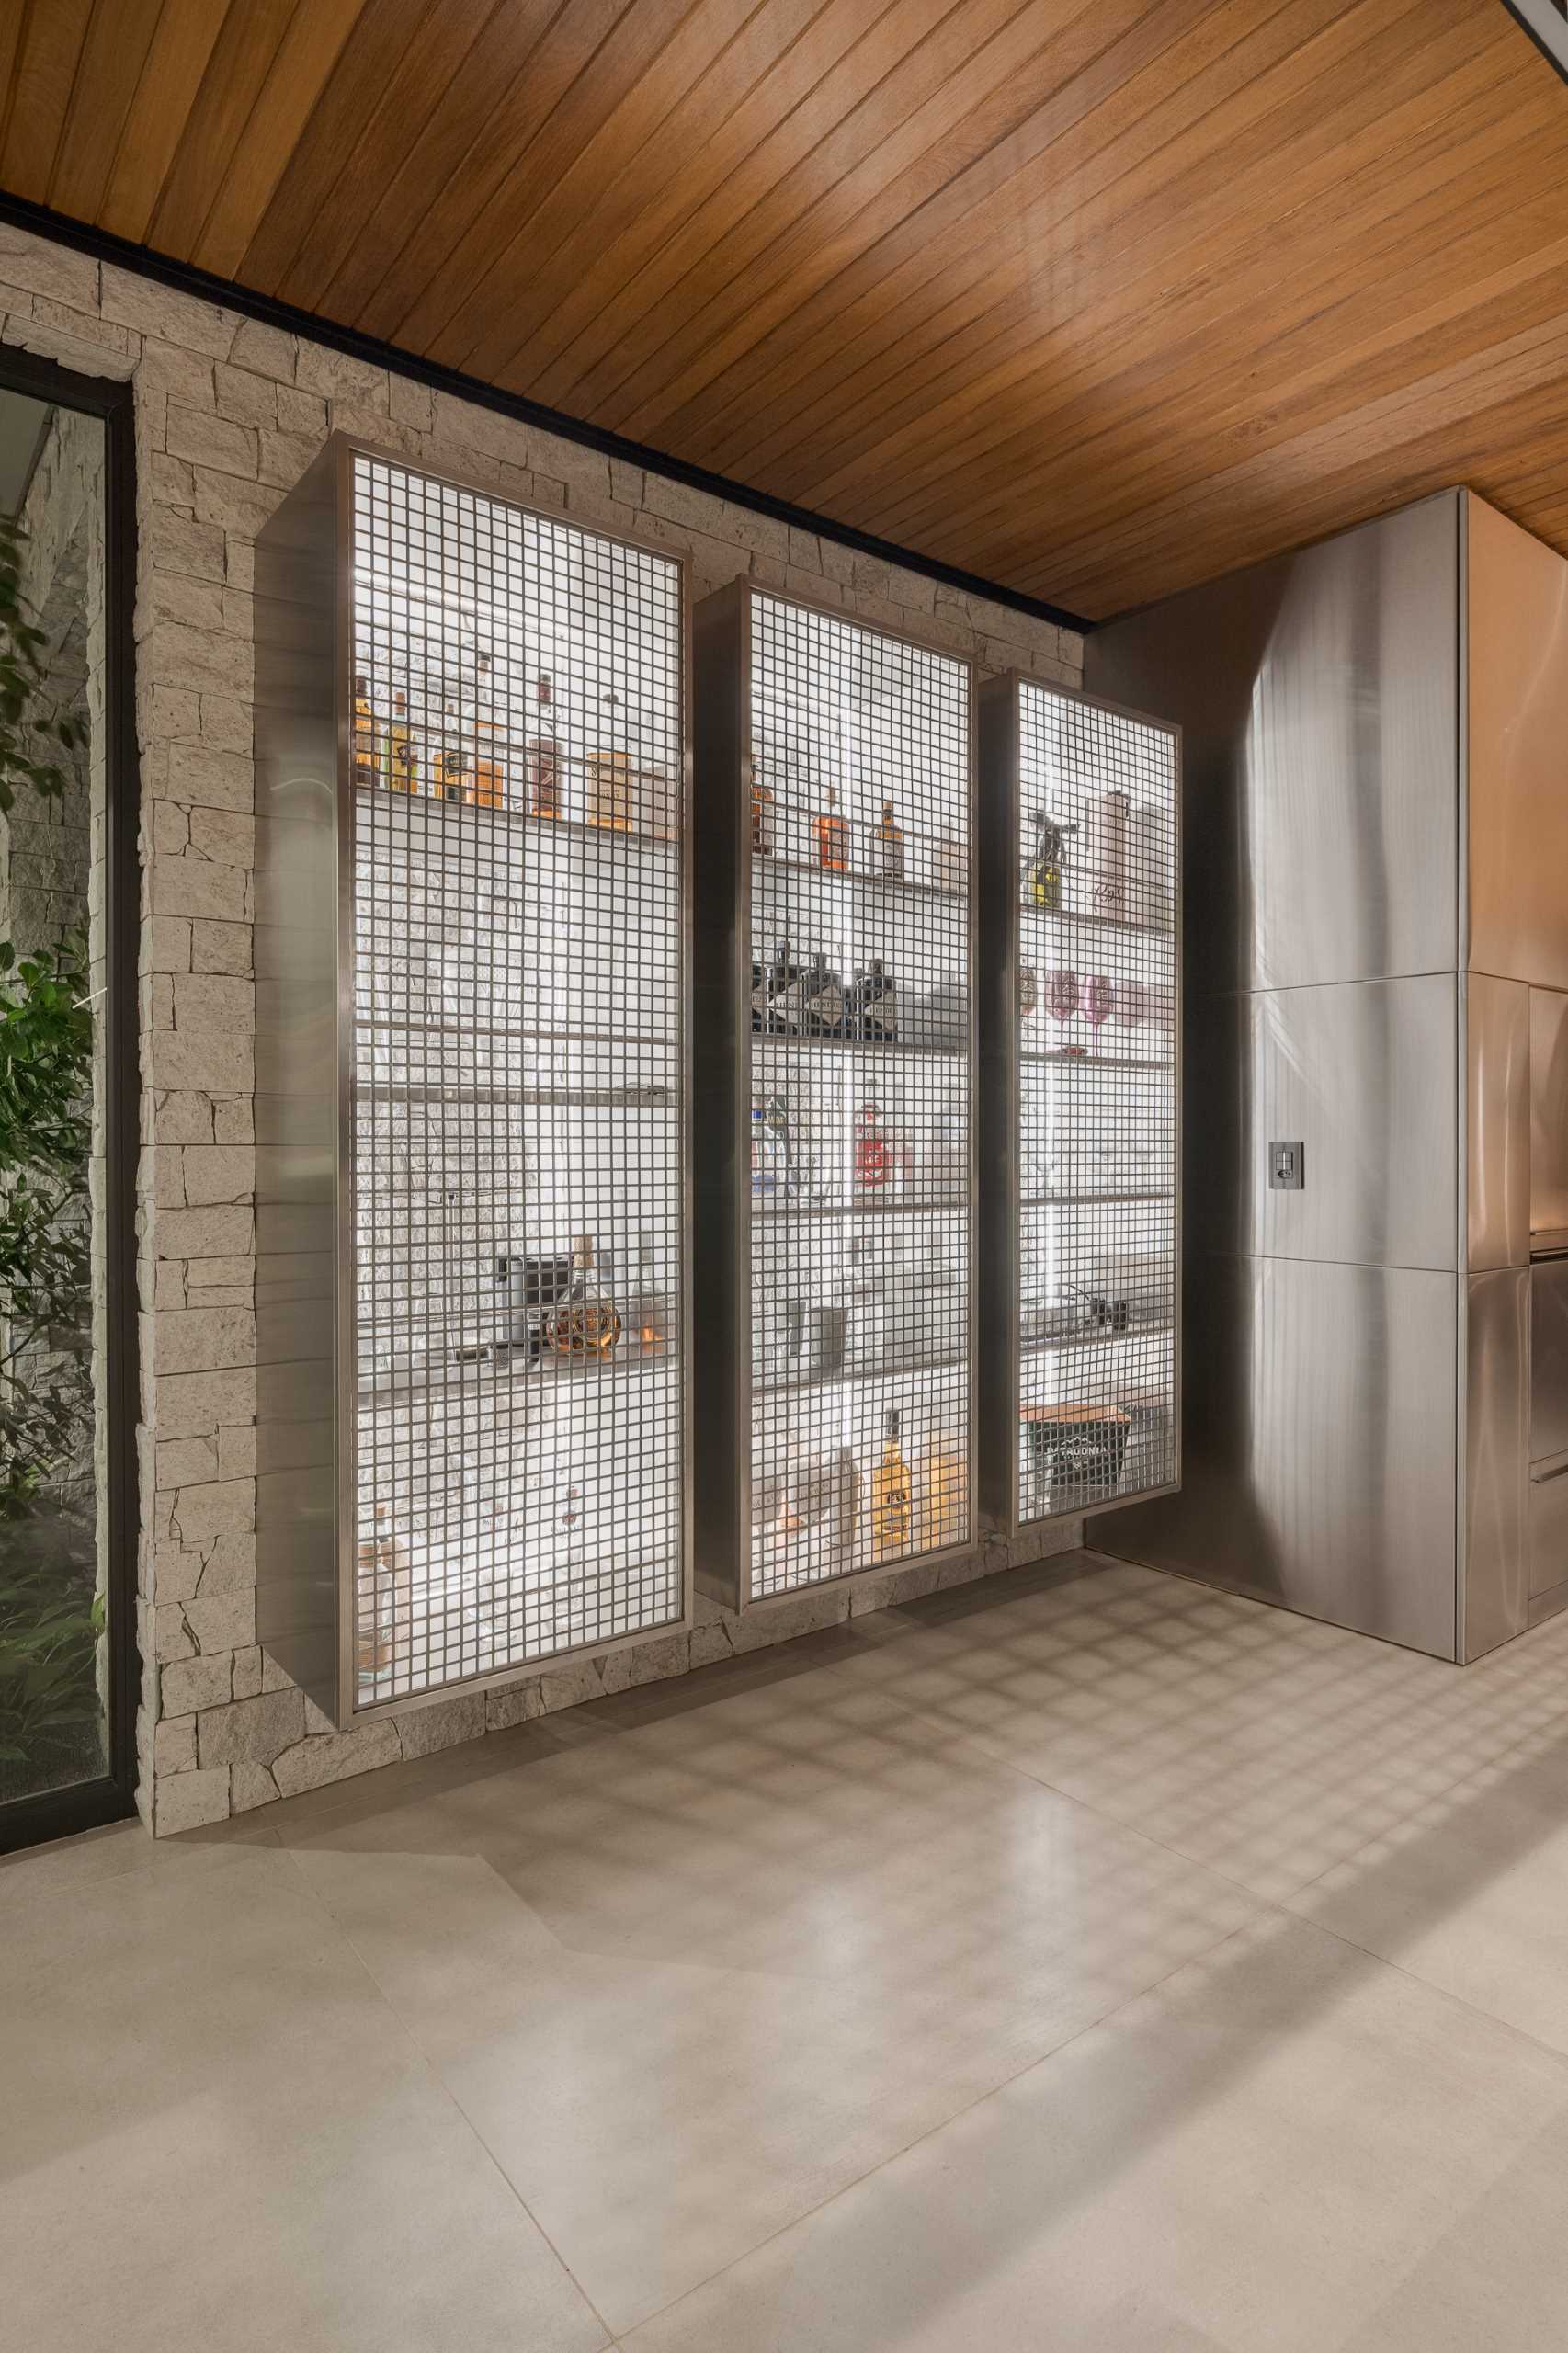 Metal cabinets with cage-like doors are used for storing a variety of drinks.